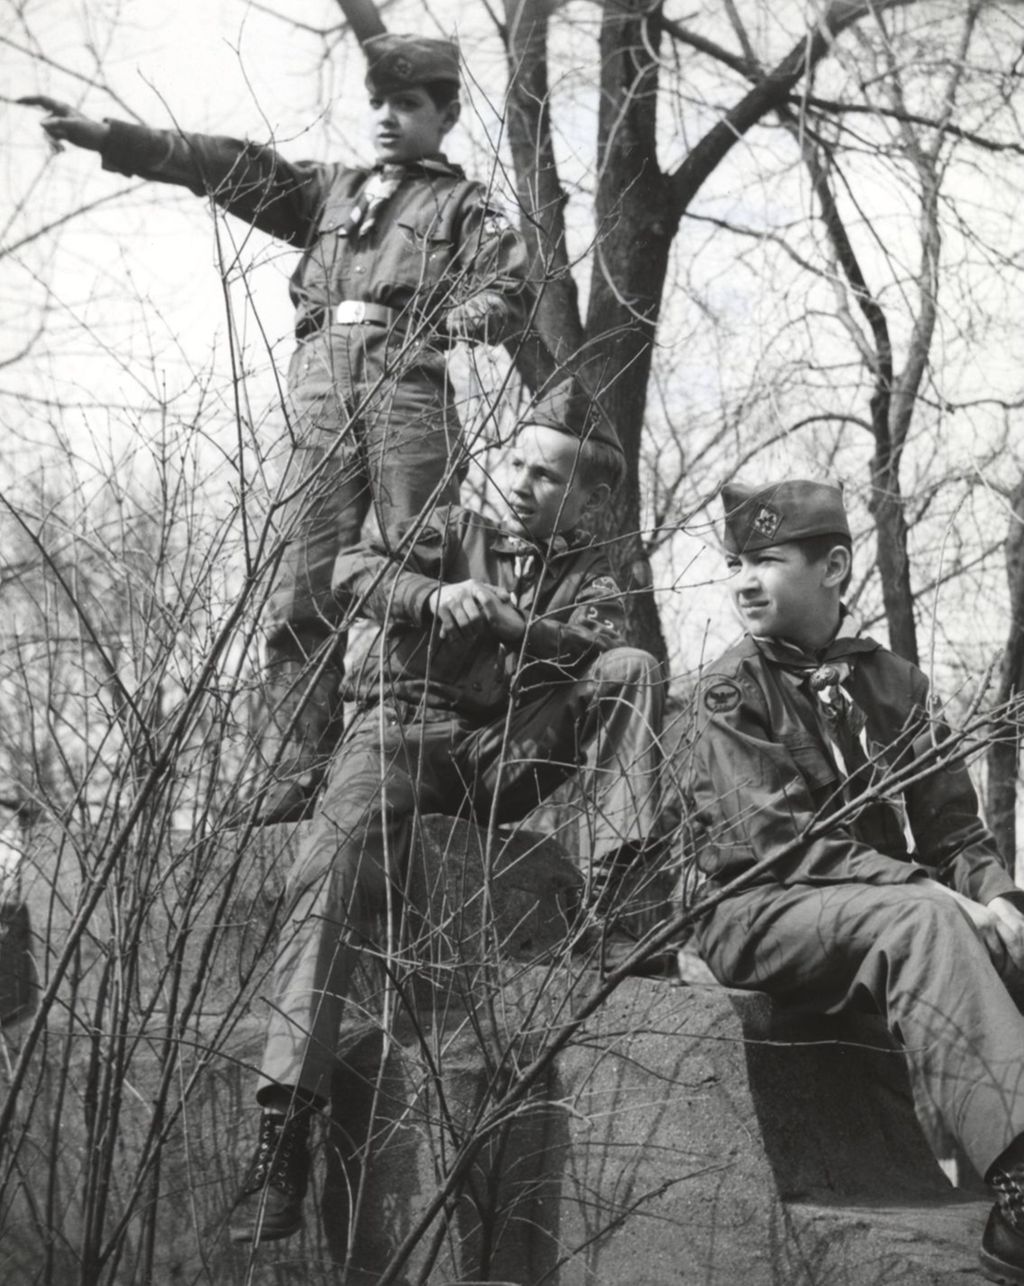 Boy scouts from Troop 225 on a hike in Forest Preserve